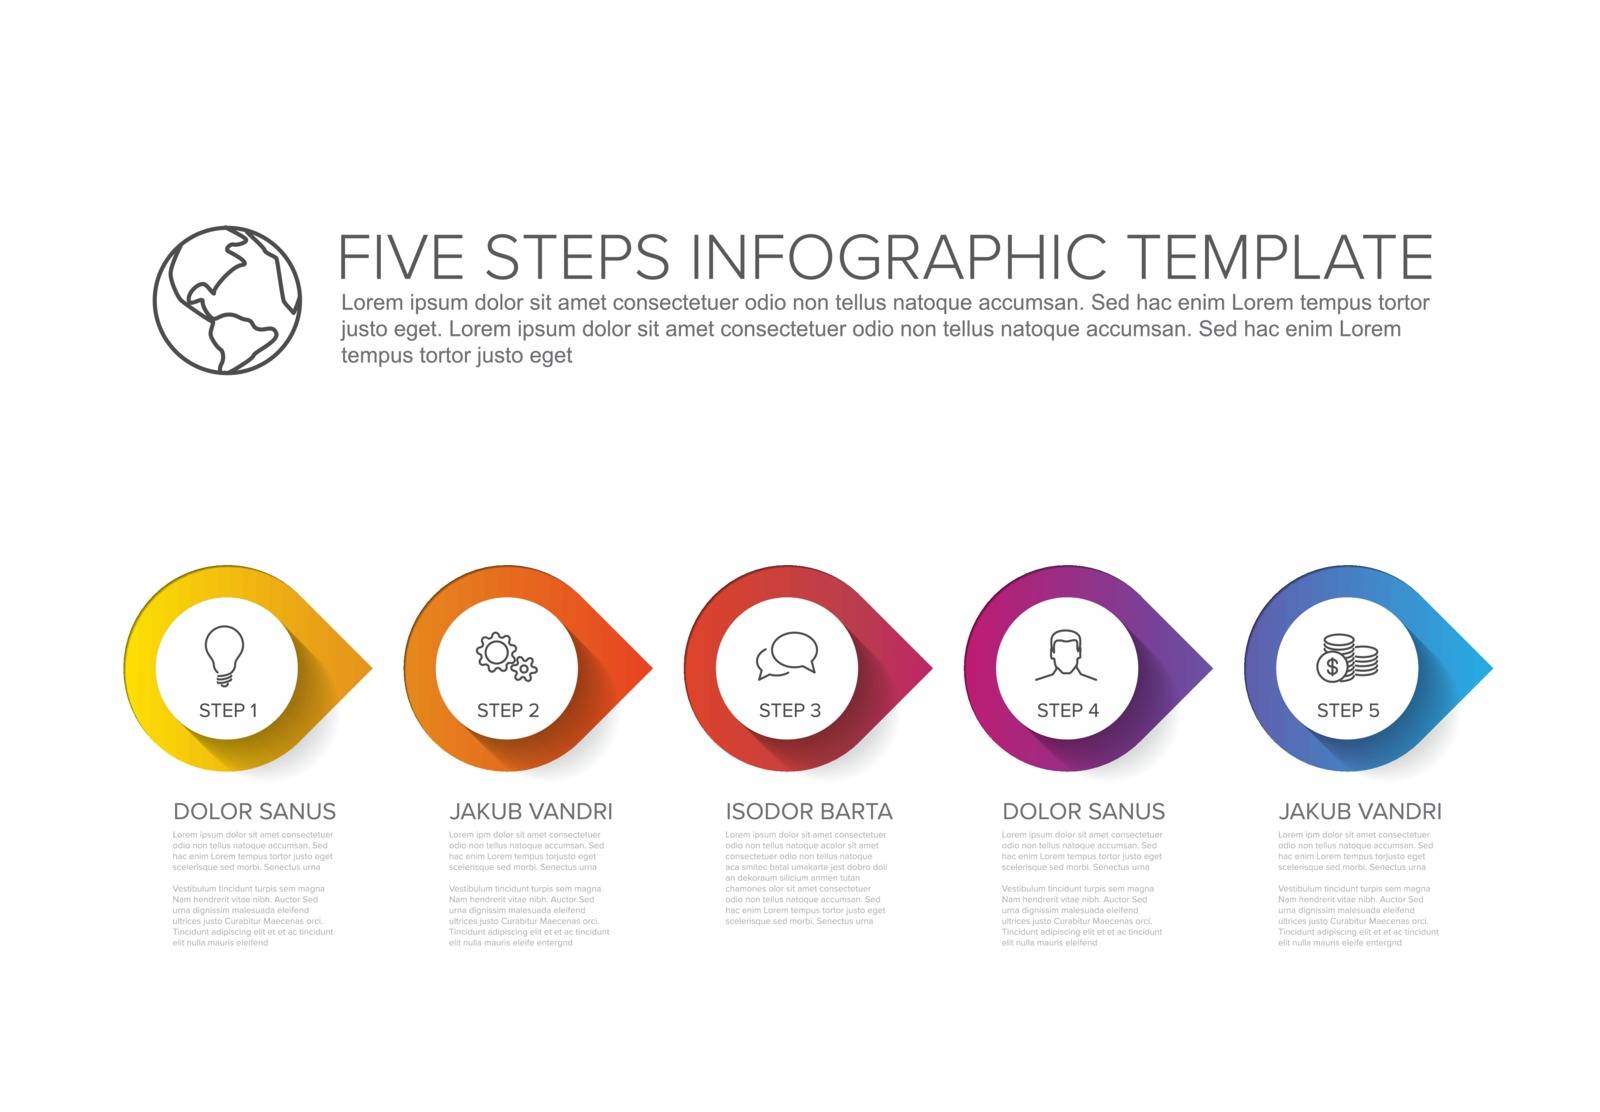 One two three four five - vector progress template with five steps and description